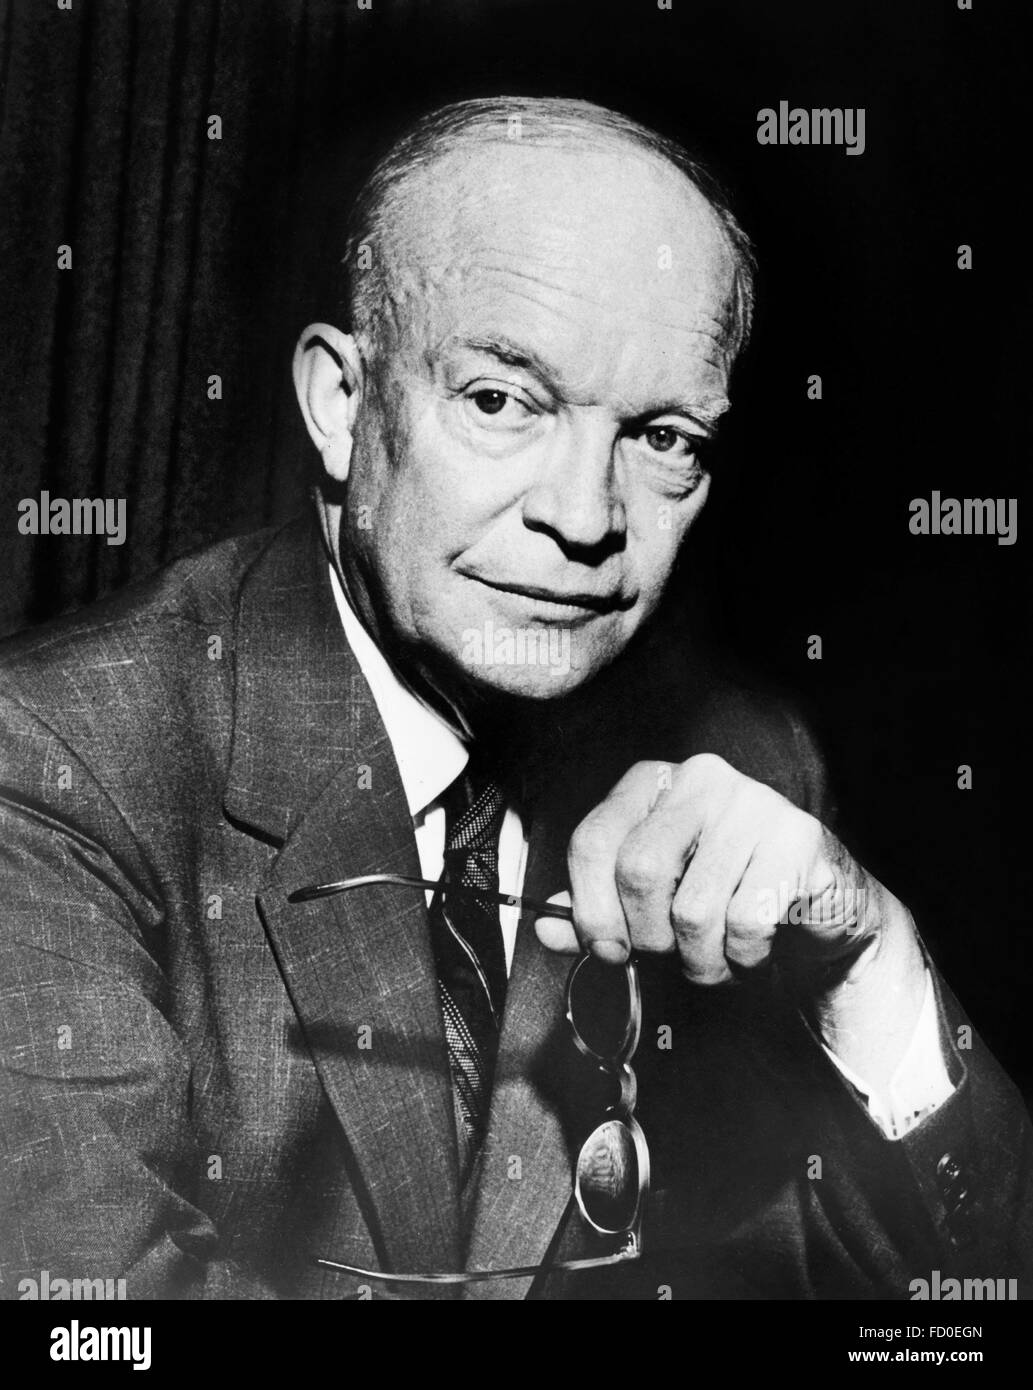 Eisenhower. Portrait of Dwight D Eisenhower, the 34th President of the USA, c.1954 Stock Photo